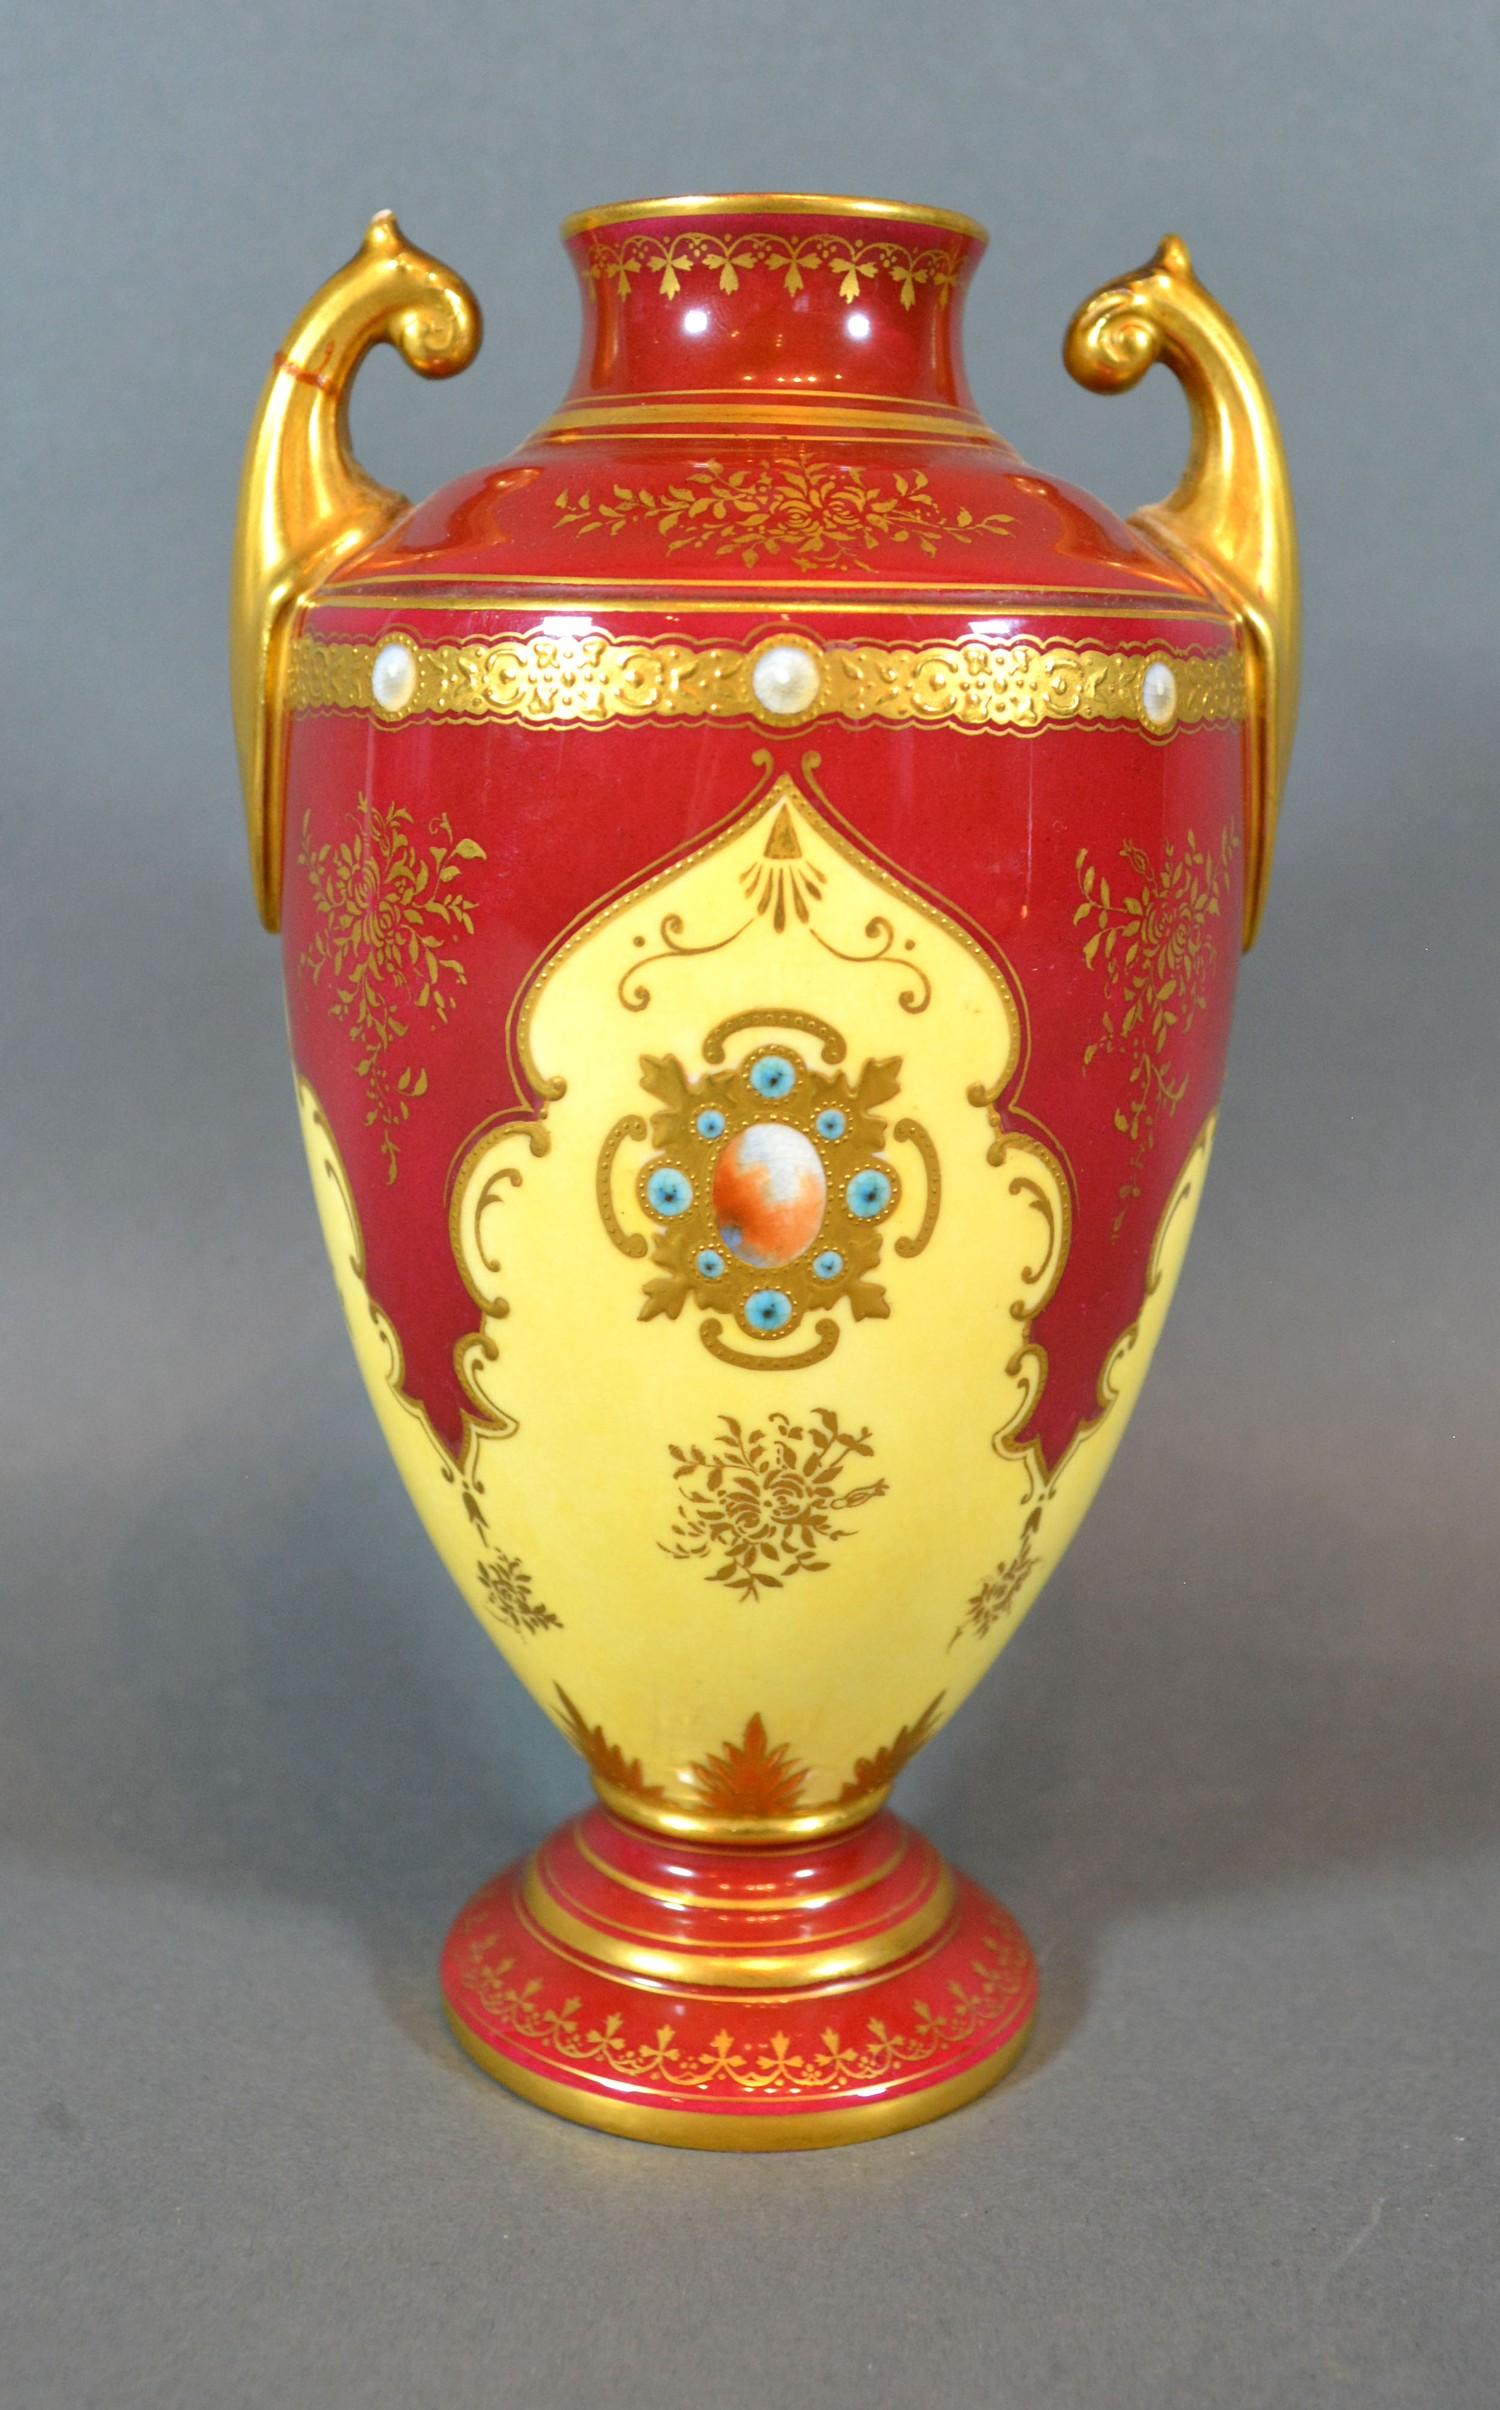 A Coalport Porcelain Two Handled Vase hand painted with a reserve upon a red and cream ground - Image 3 of 4